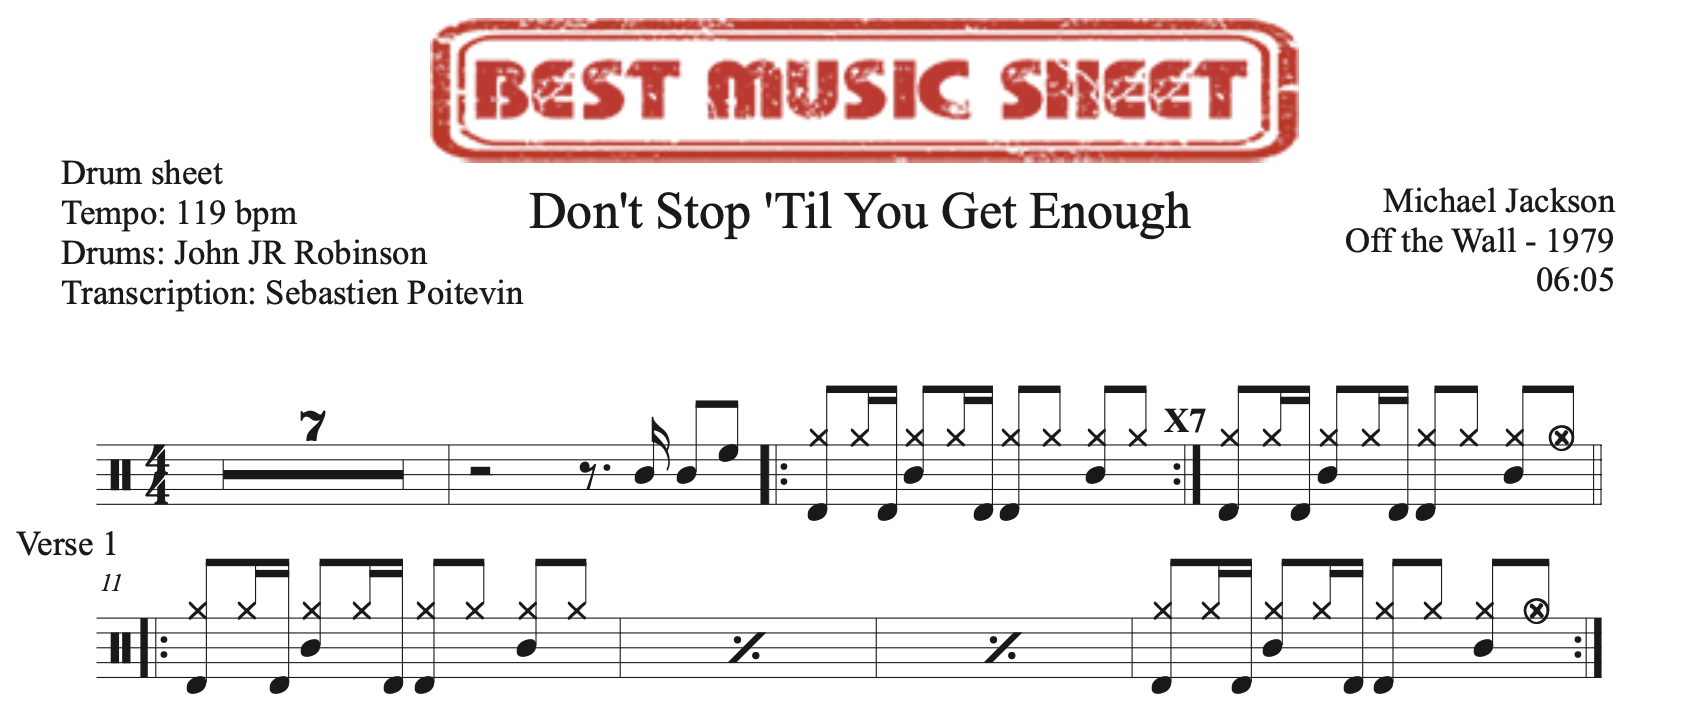 Sample drum sheet of Don't Stop 'Til You Get Enough by Michael Jackson